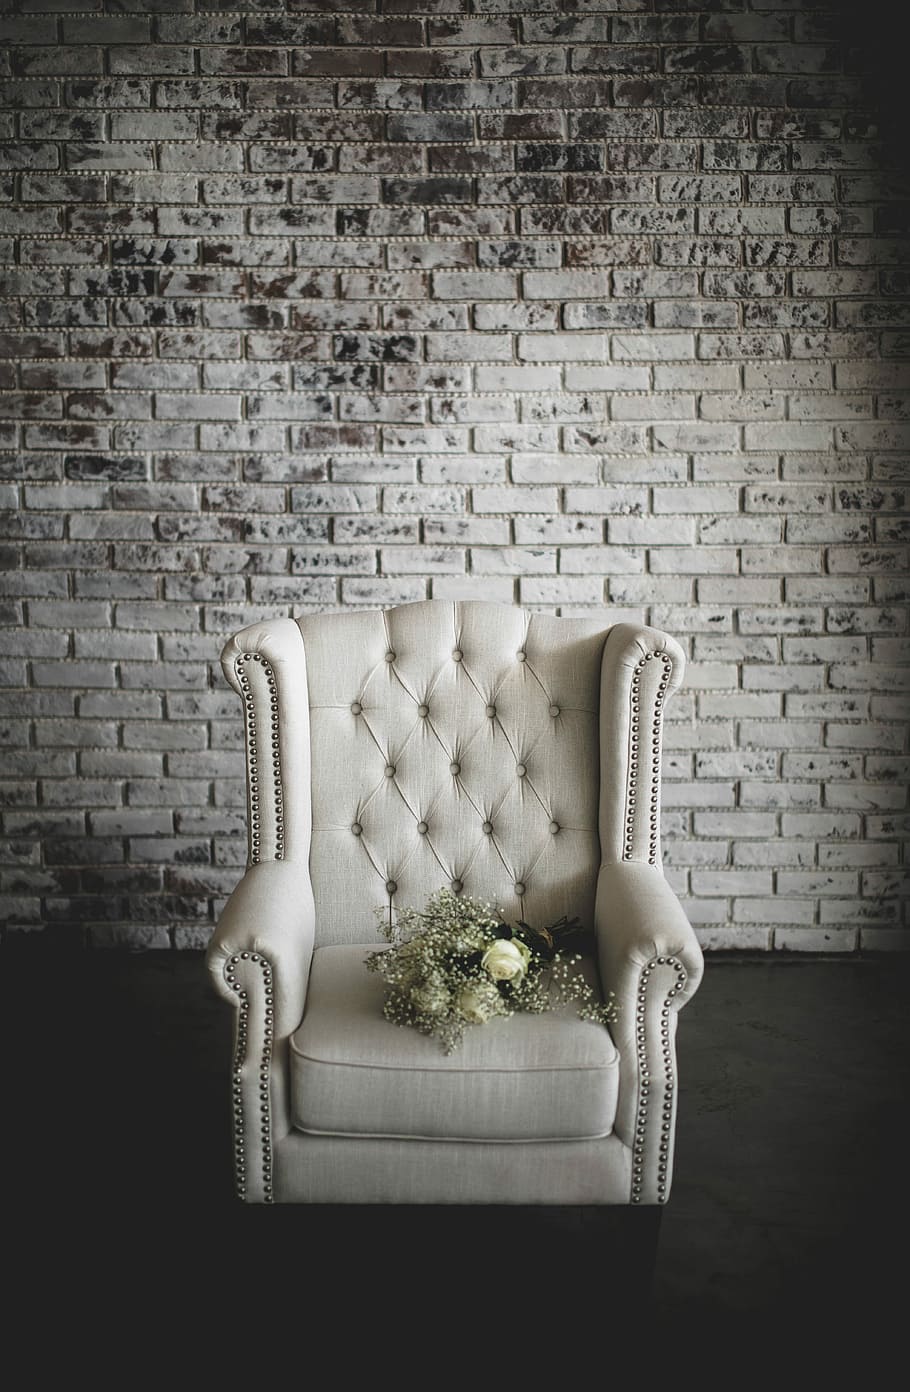 white flowers on top of white armchair, red rose flower bouquet on tufted white fabric armchair in front of gray concrete brick wall, HD wallpaper